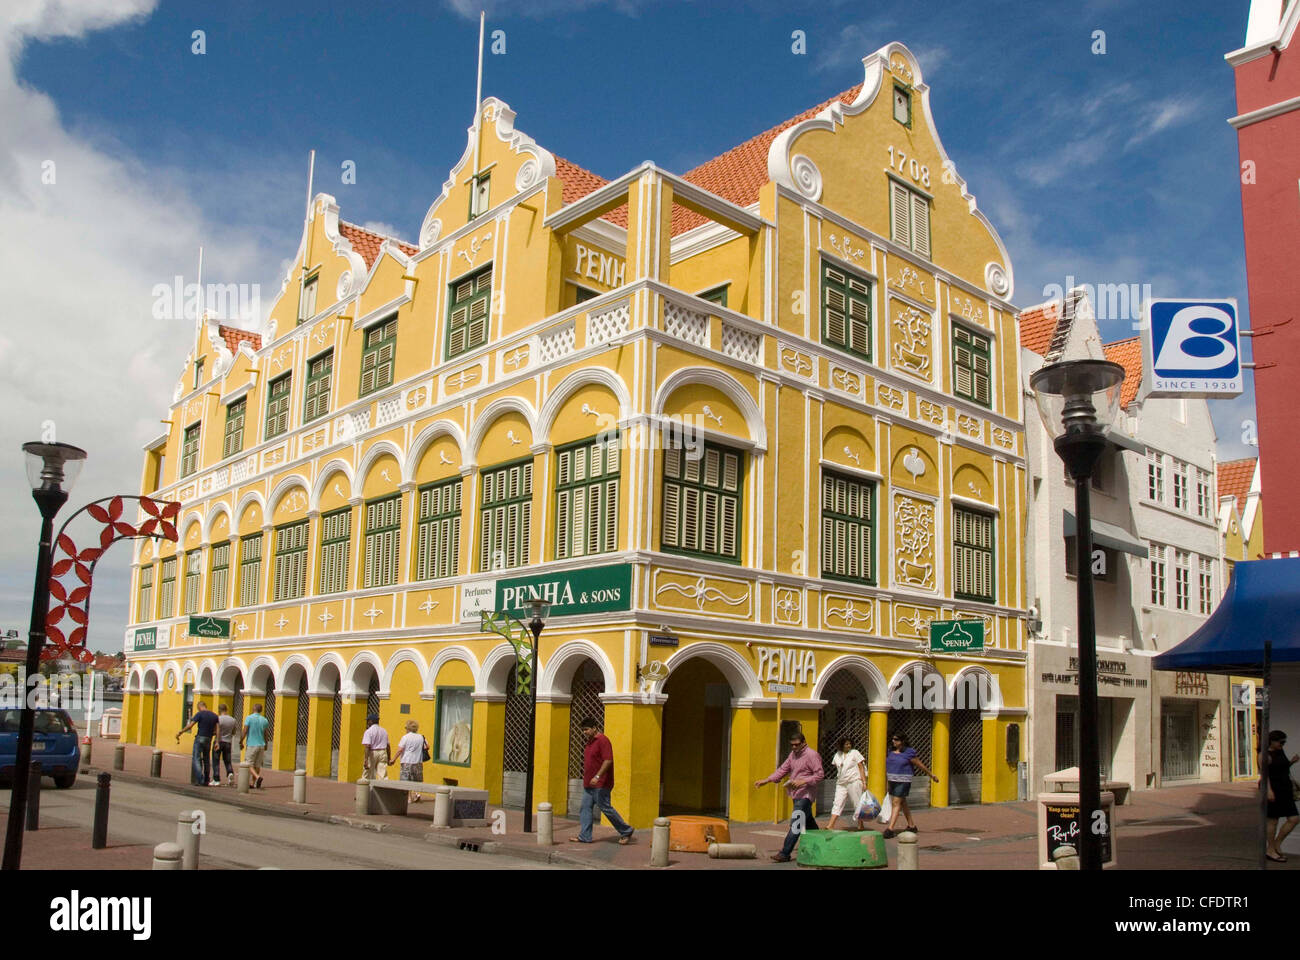 Dutch style buildings in the Punda central district, Willemstad, Curacao (Dutch Antilles), West Indies Stock Photo